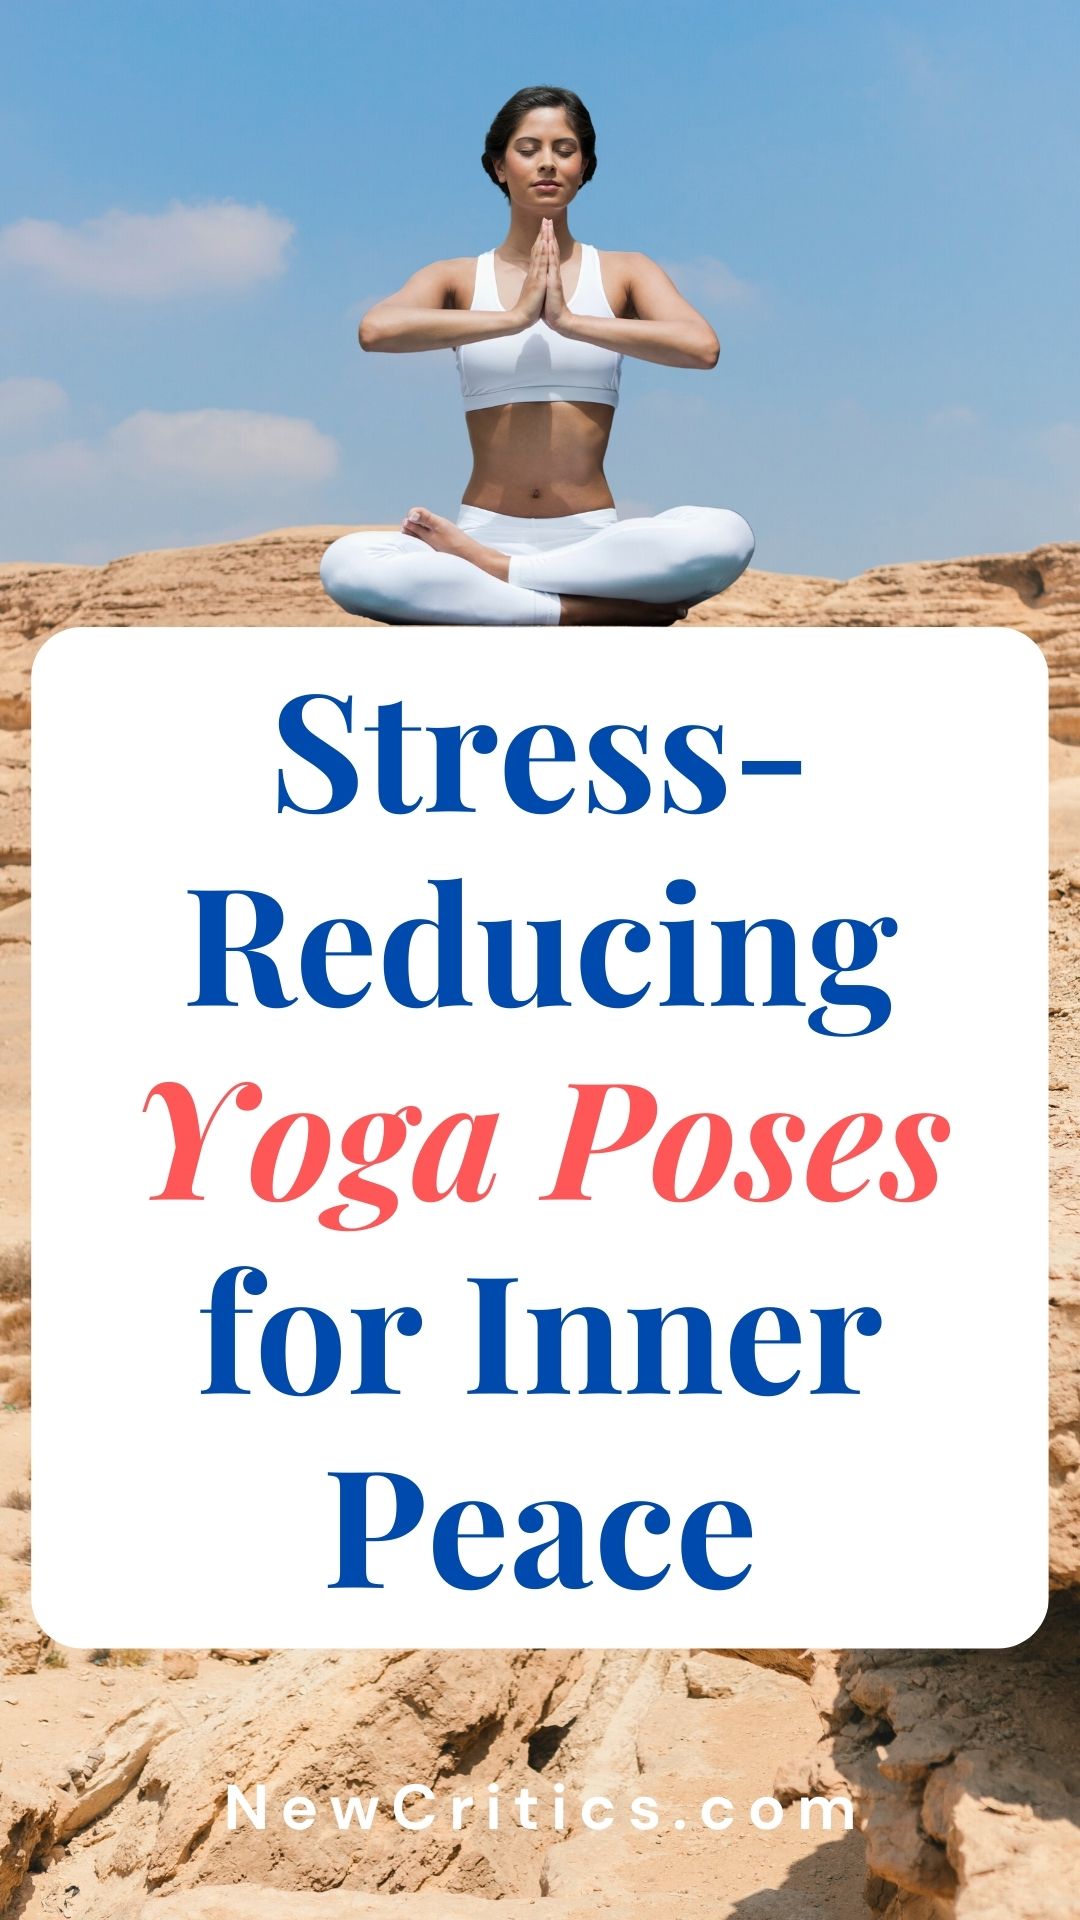 Stress-Reducing Yoga Poses for Inner Peace / Canva